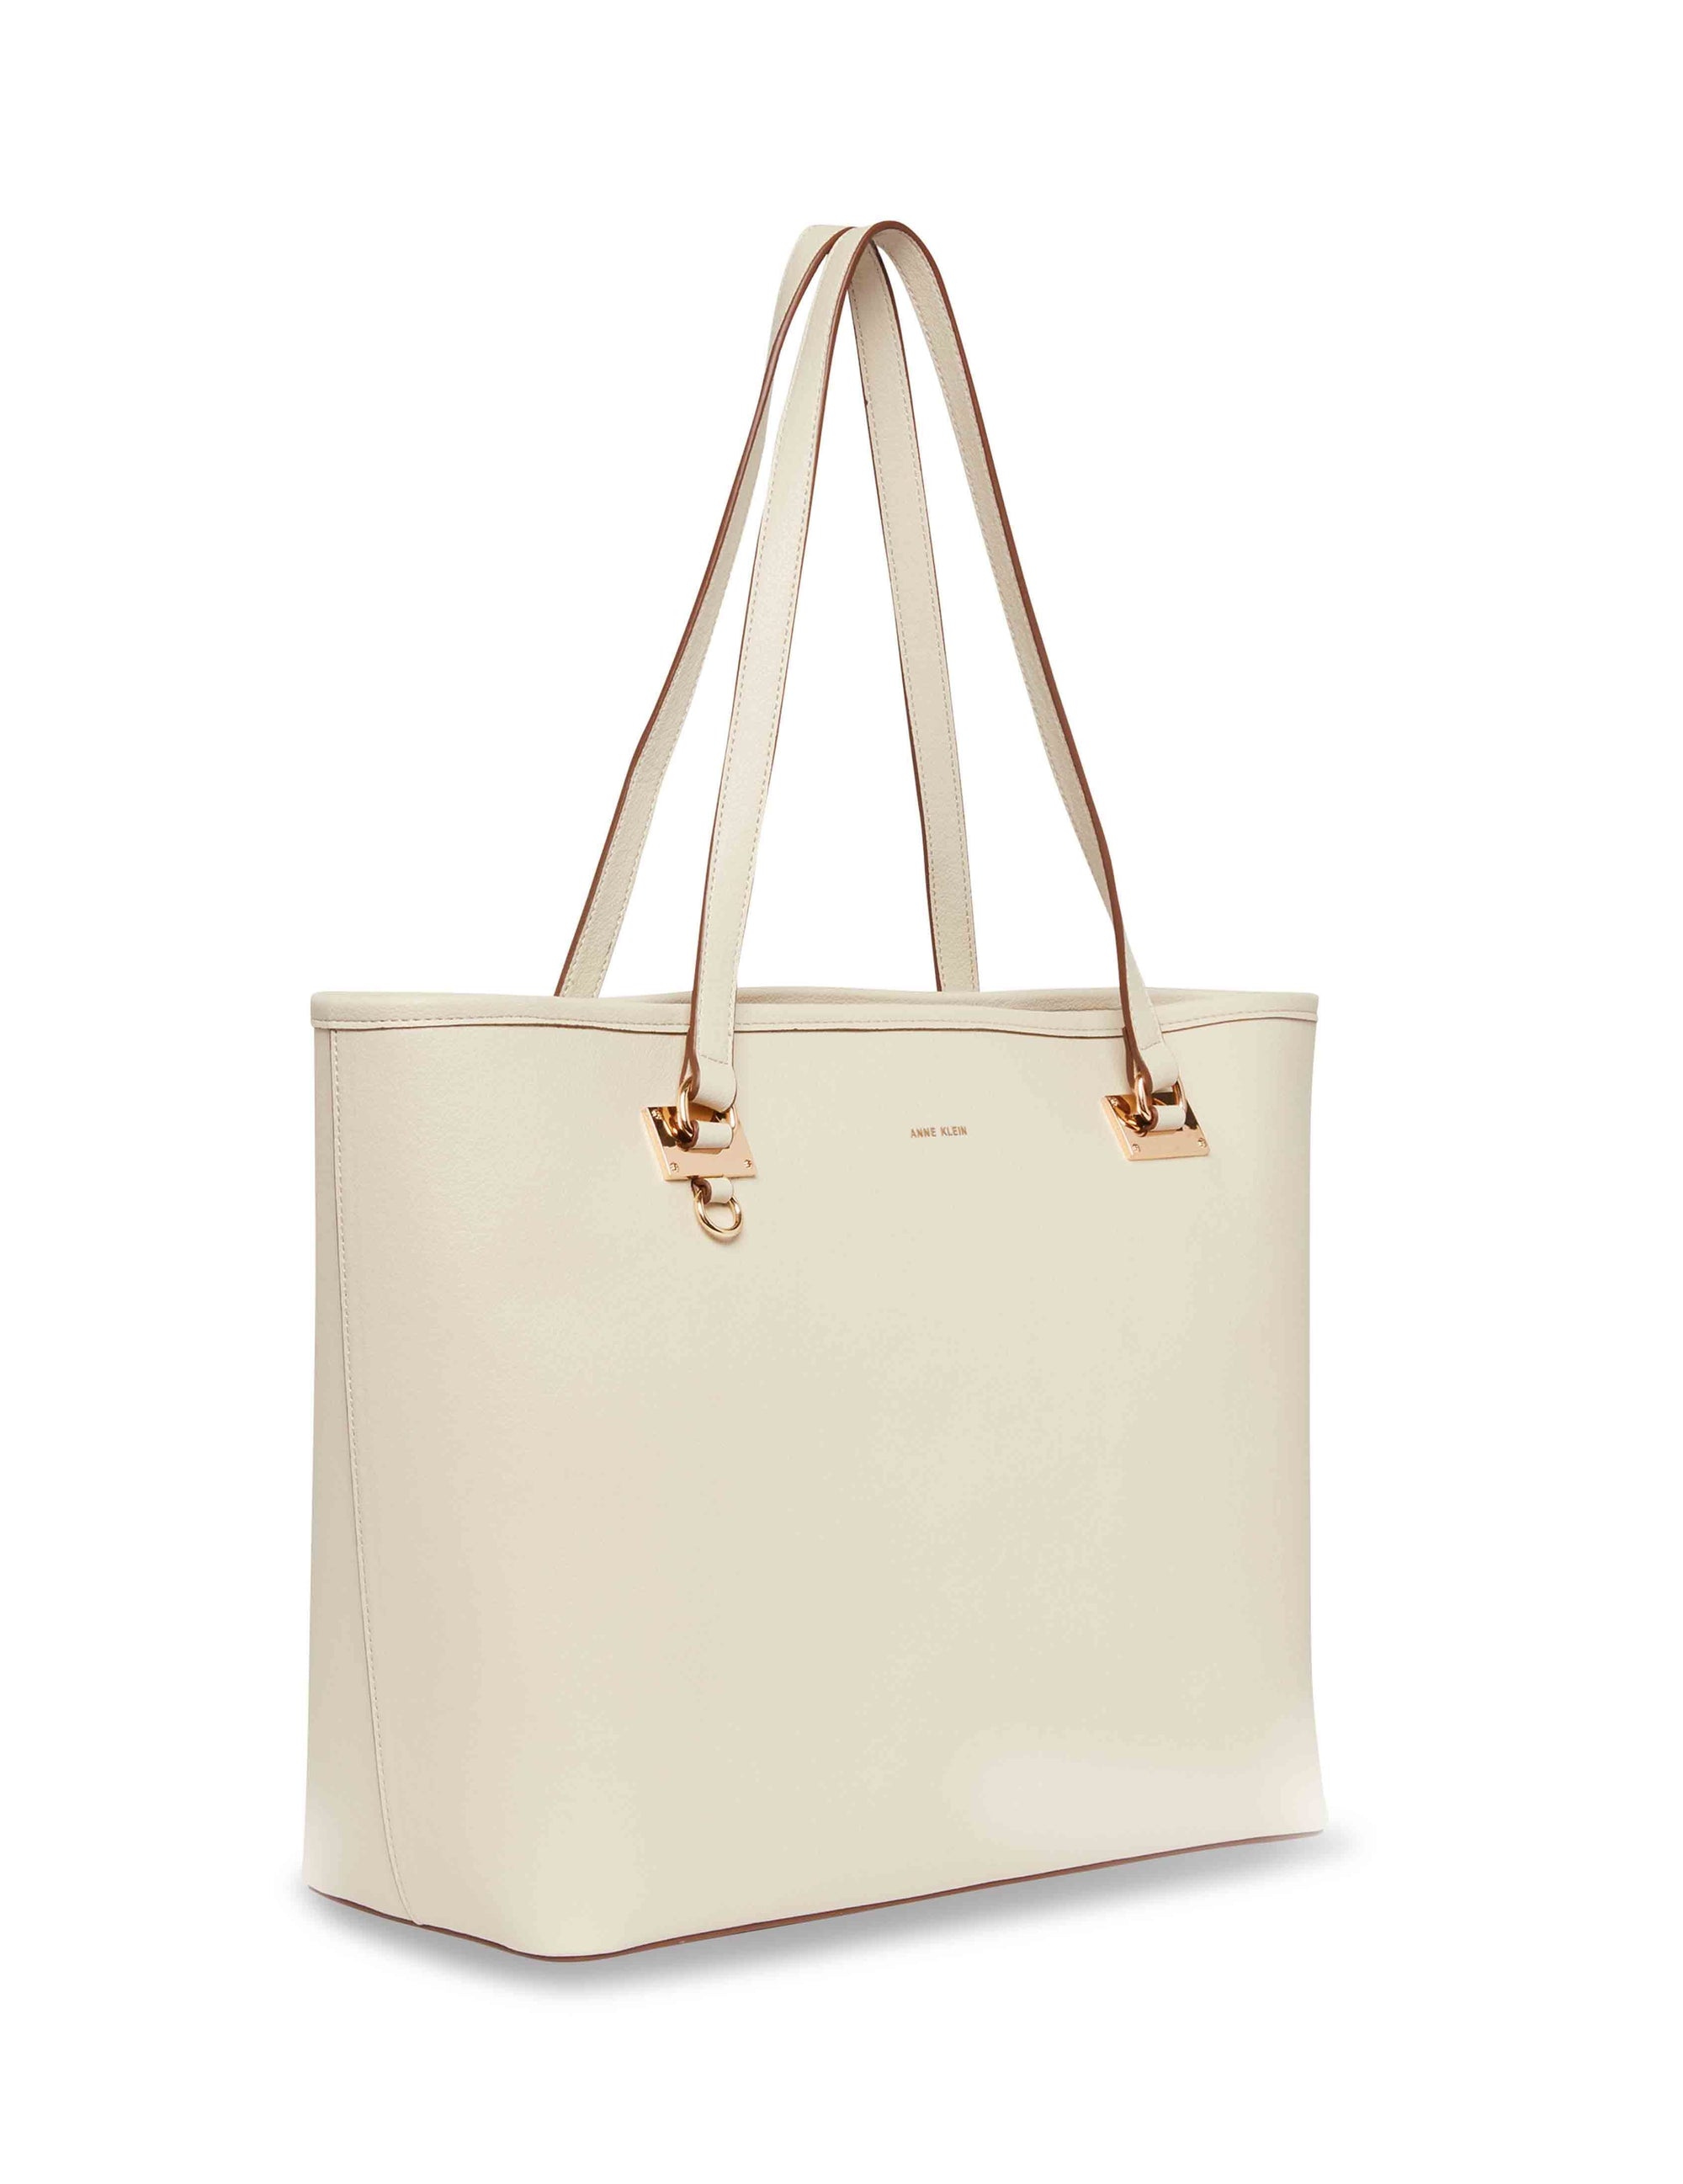 2024 - White Tote Bag - Frankly Wearing